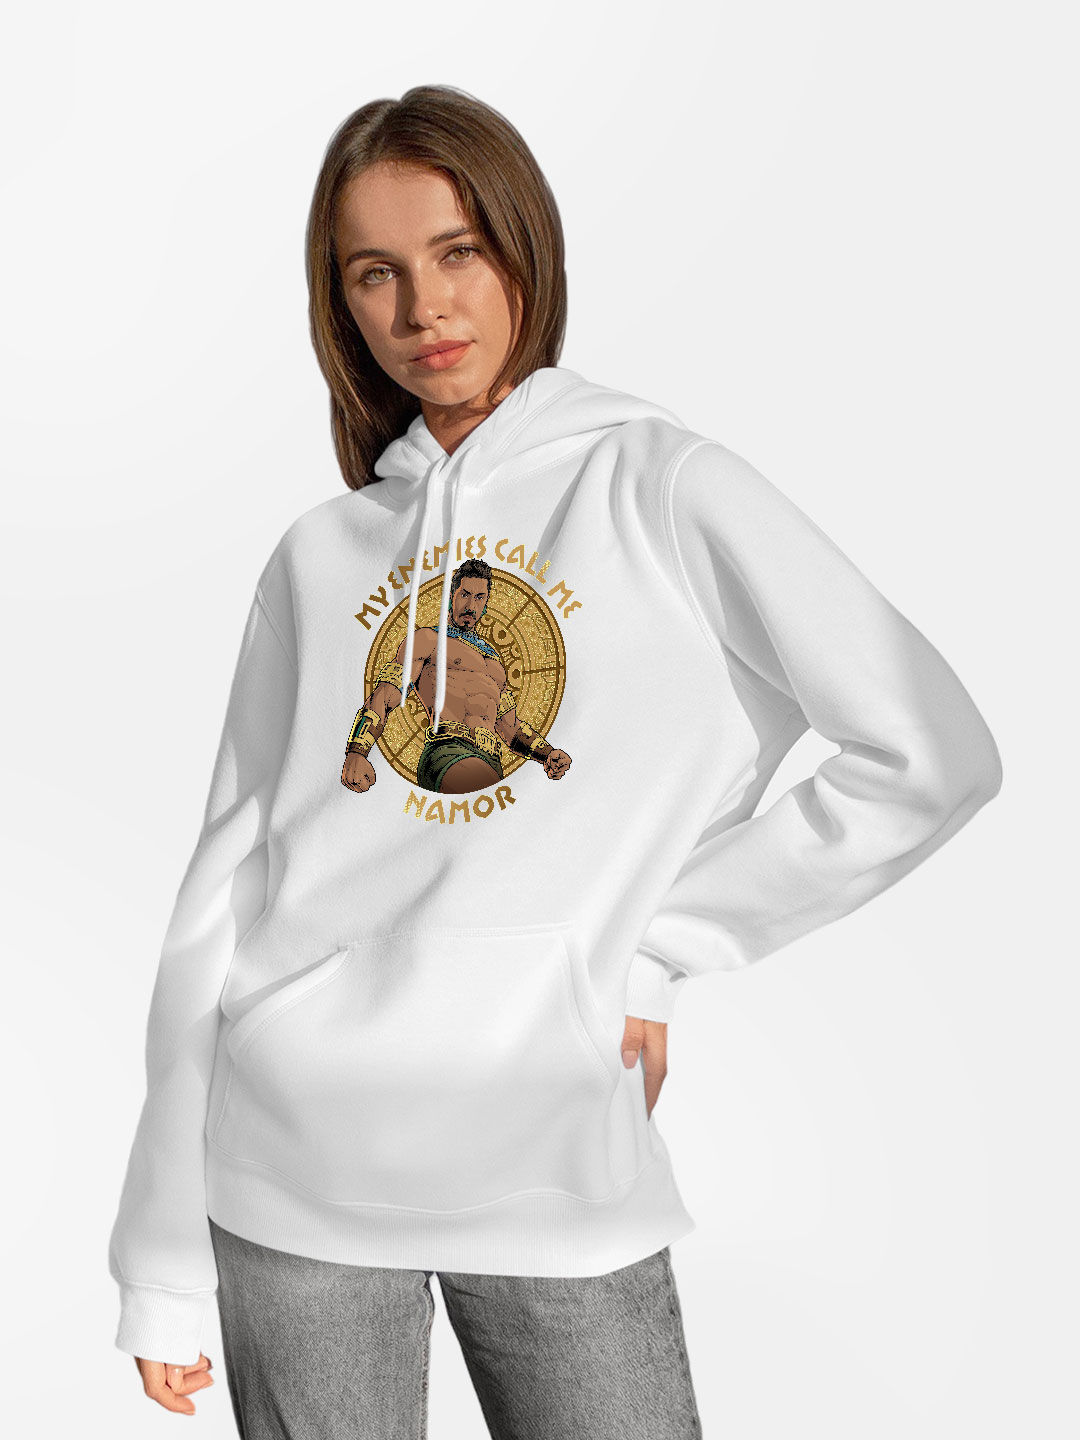 Buy Wakanda Forever Calling White Womens Hoodies Online at Best Price.| Womens Hoodies Size : XL Color : White